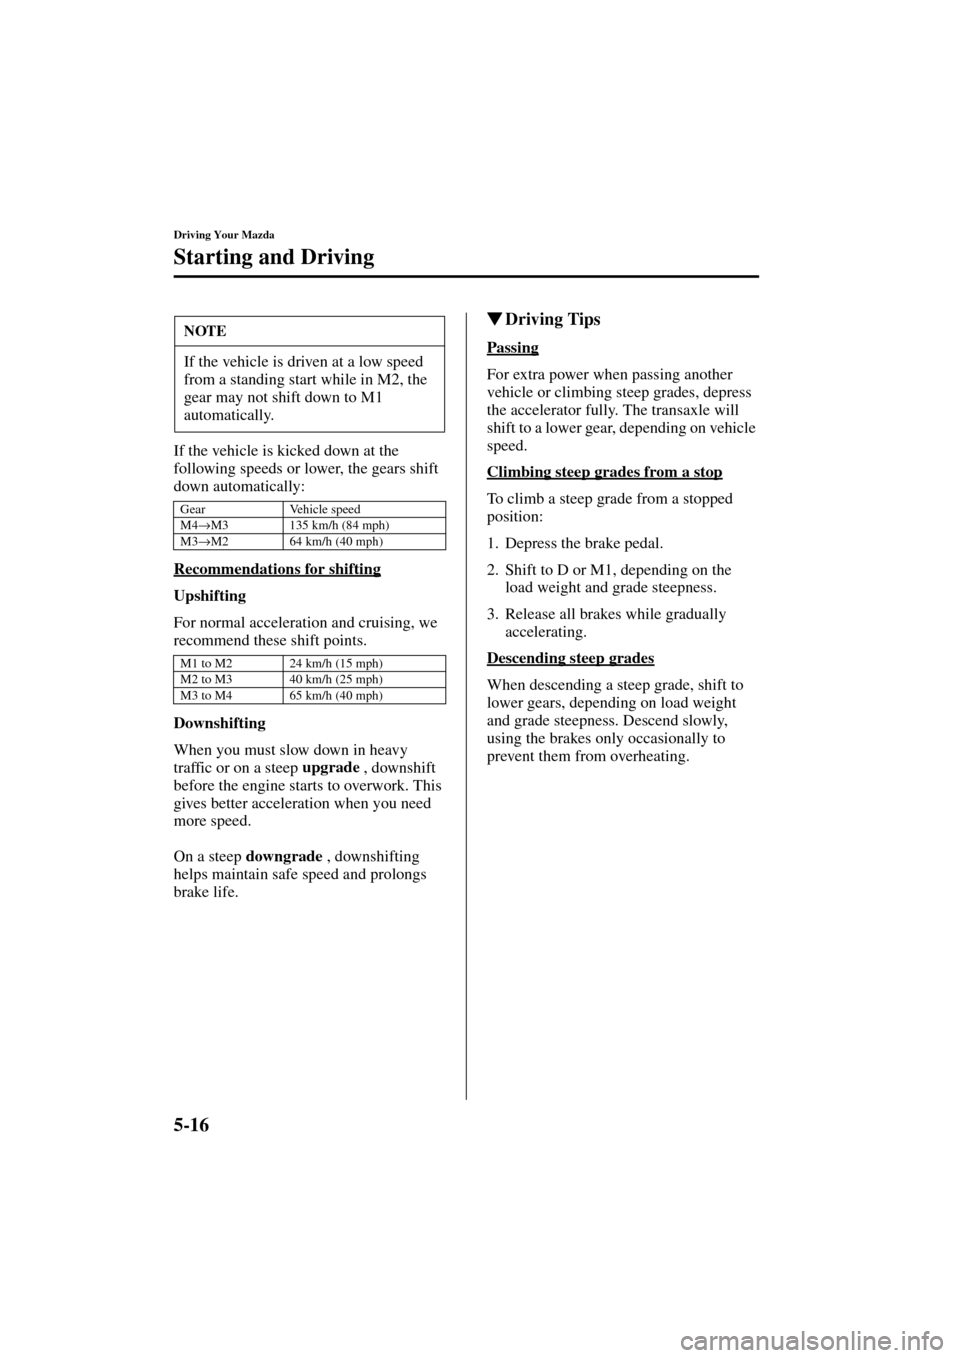 MAZDA MODEL 3 HATCHBACK 2004  Owners Manual (in English) 5-16
Driving Your Mazda
Starting and Driving
Form No. 8S18-EA-03I
If the vehicle is kicked down at the 
following speeds or lower, the gears shift 
down automatically:
Recommendations for shifting
Ups